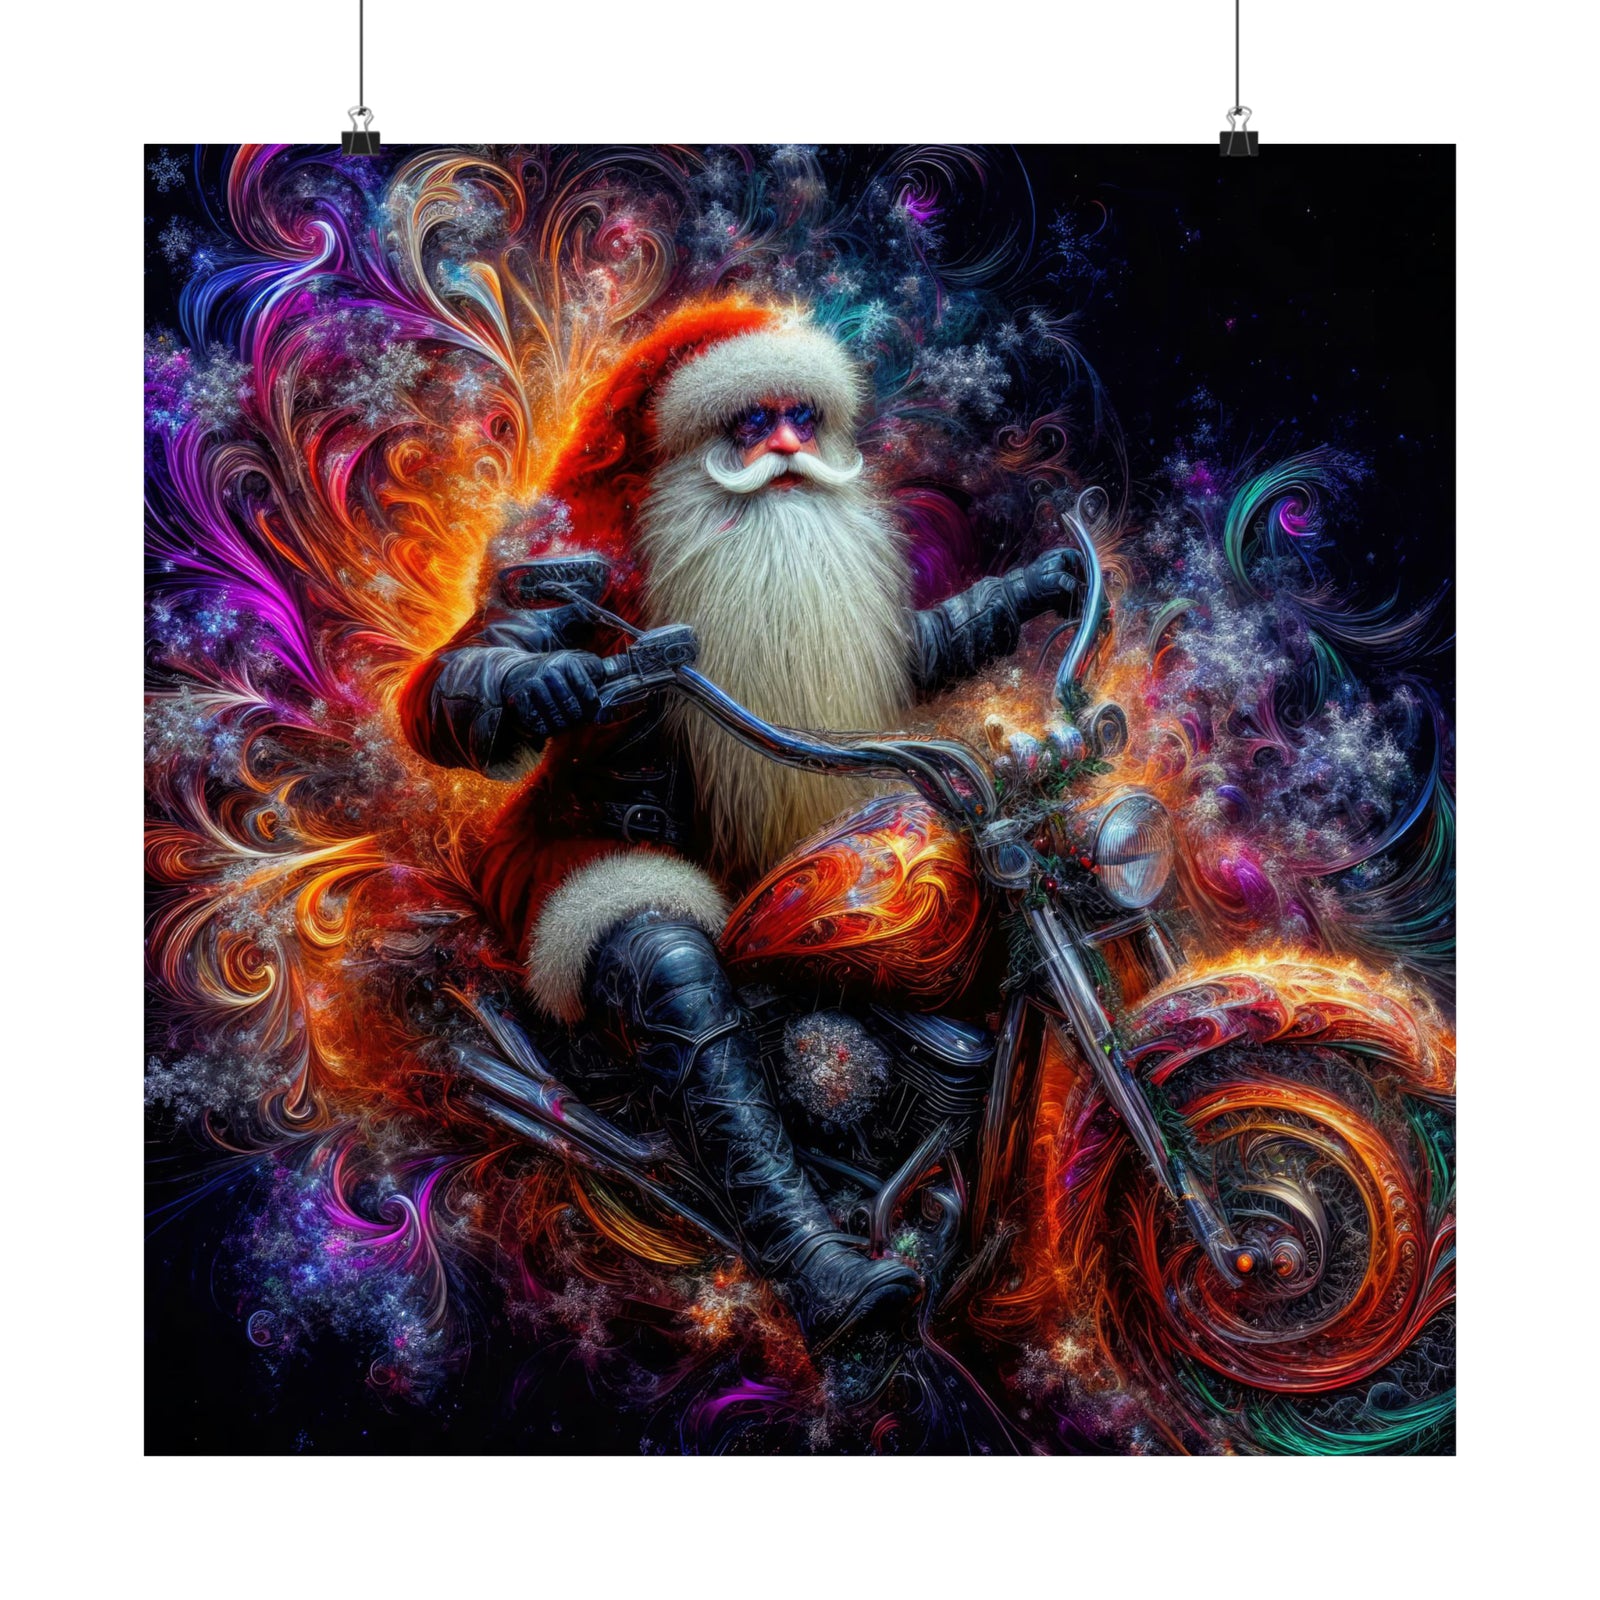 Copy of Cosmic Claus Poster